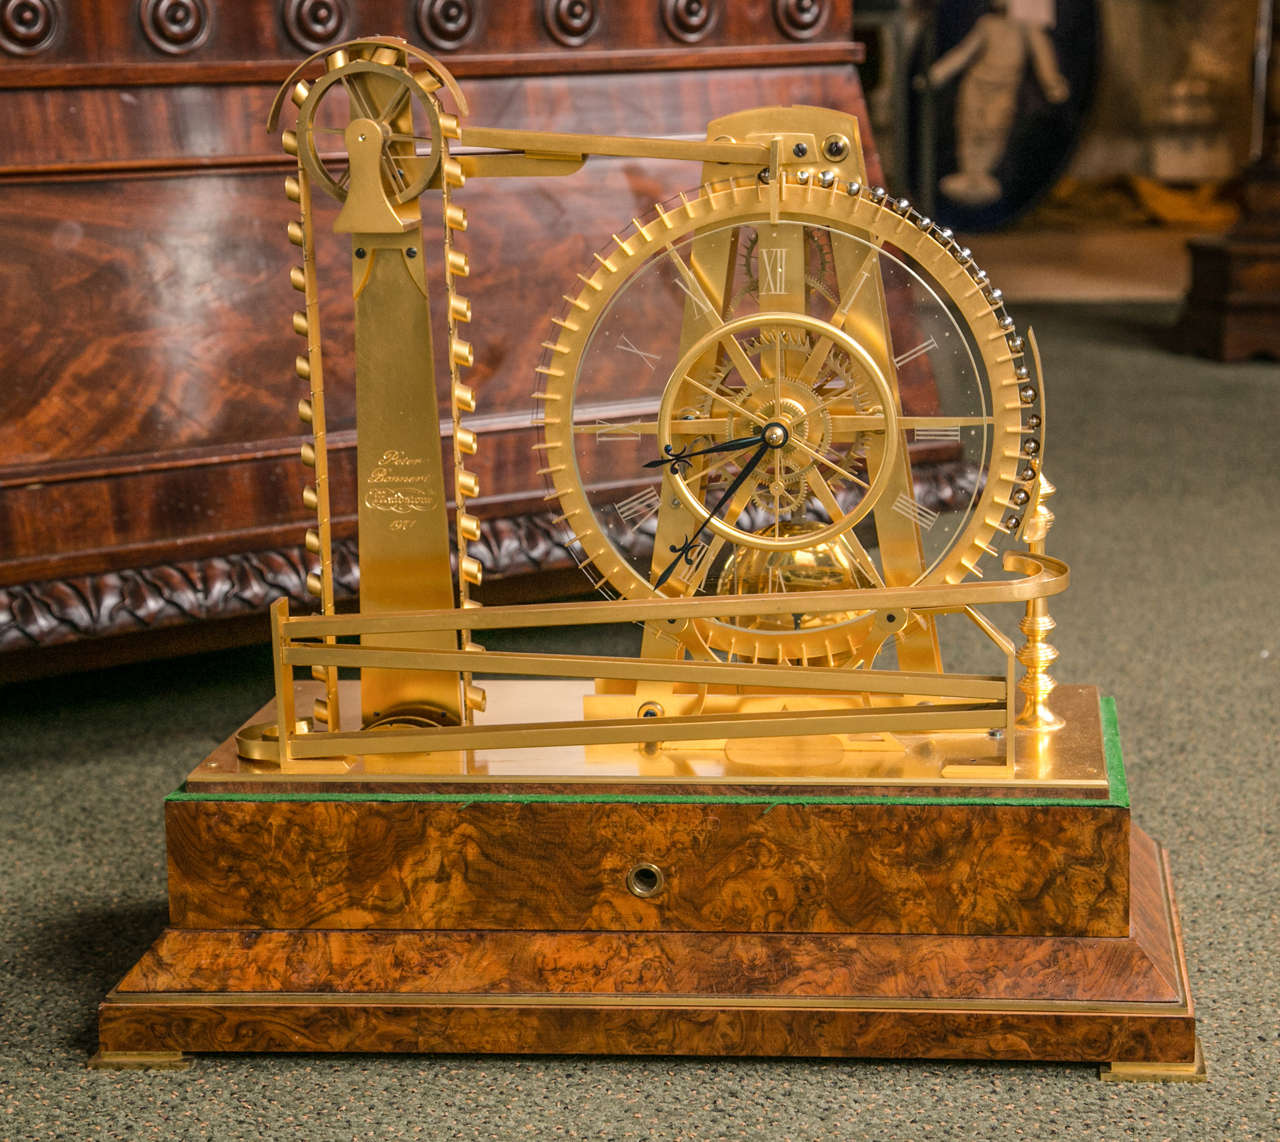 An English gilt brass constant force waterwheel timepiece by the highly respected contemporary horologist Peter Bonnert.

The six pillar movement with pierced tapered plates, three wheel train with six-spoke wheel crossings and deadbeat escapement